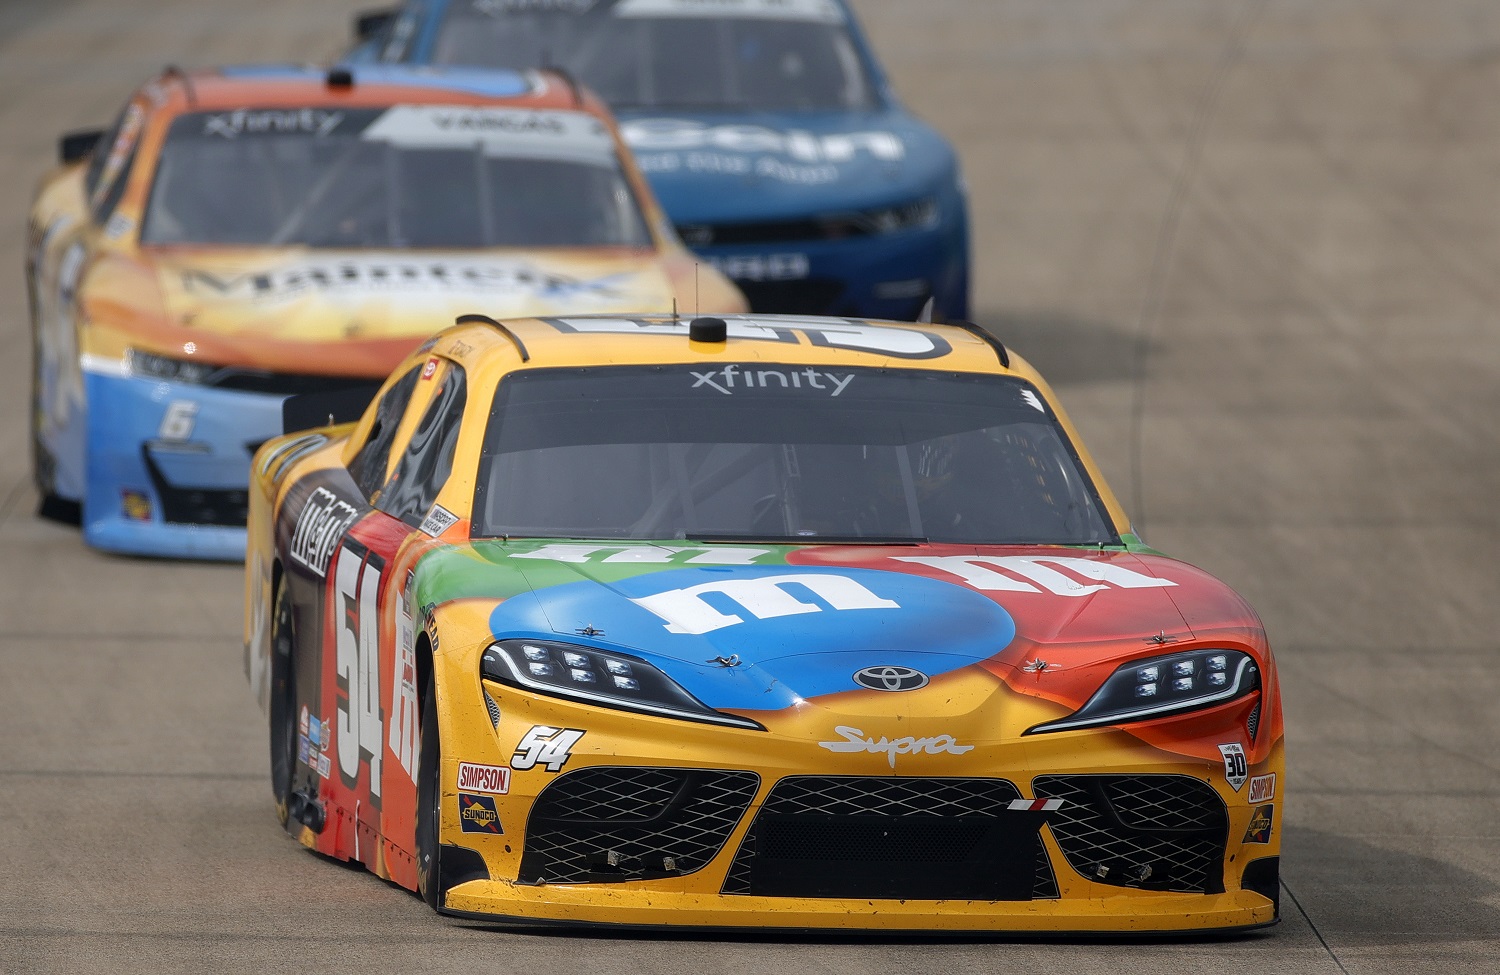 Kyle Busch, driver of the M&M's Toyota, leads the field during the NASCAR Xfinity Series Tennessee Lottery 250 at Nashville Superspeedway on June 19, 2021.